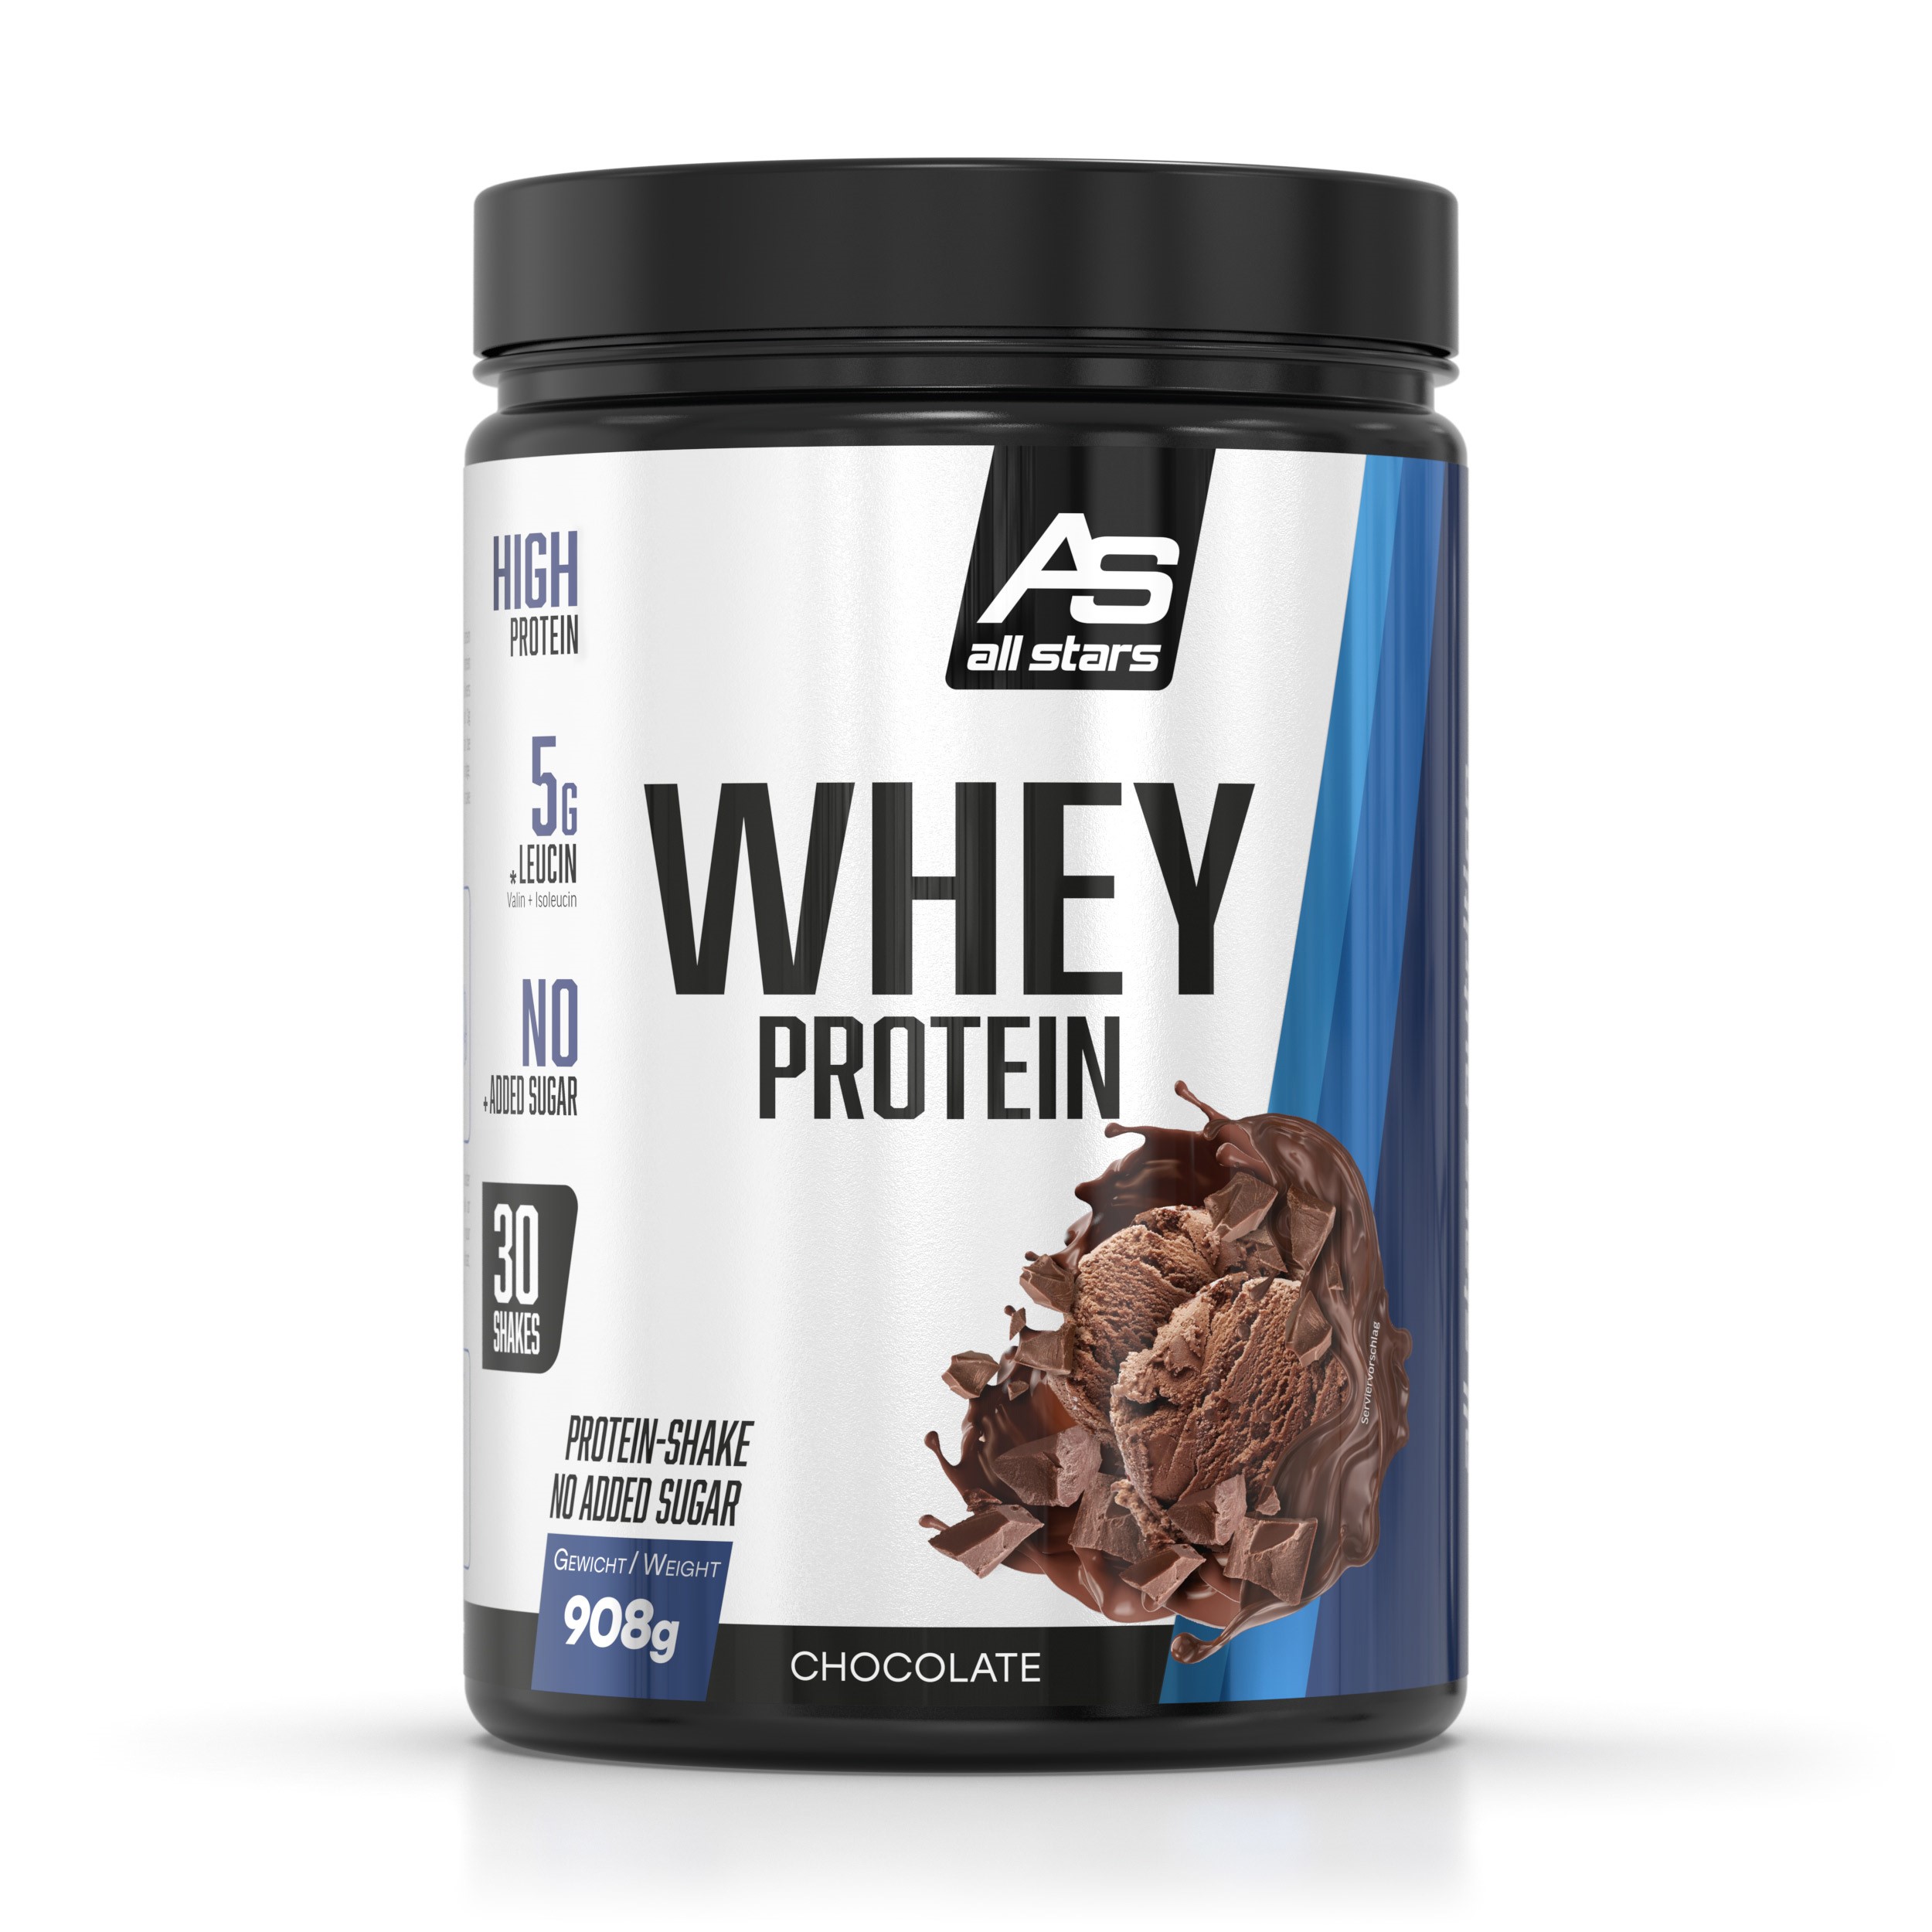 ALL STARS 100%  WHEY - 908G DOSE